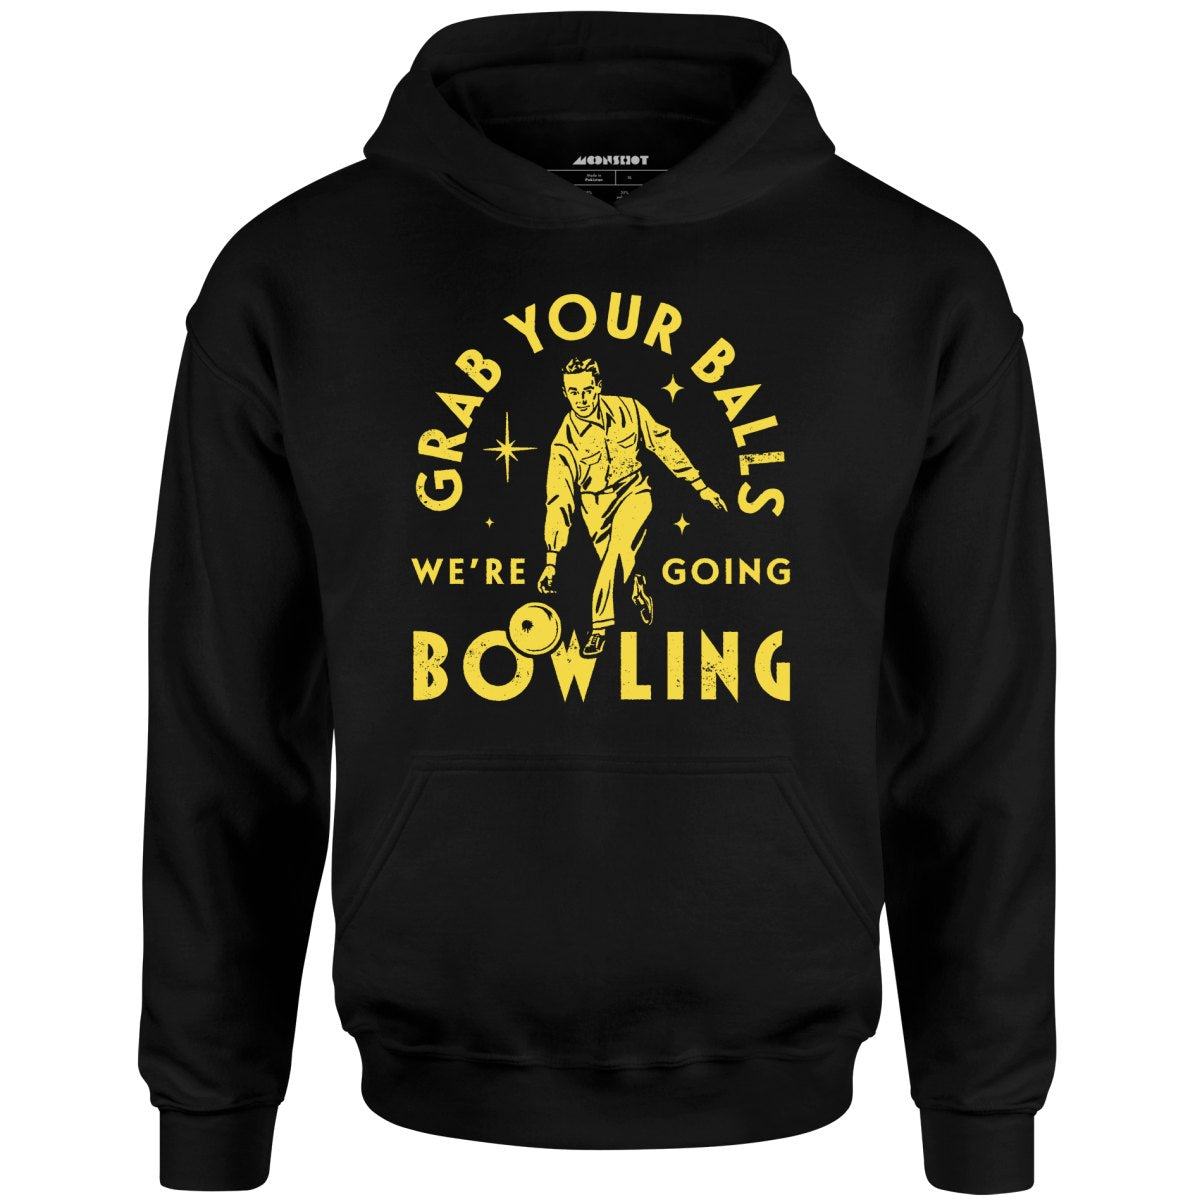 Grab Your Balls We're Going Bowling - Unisex Hoodie